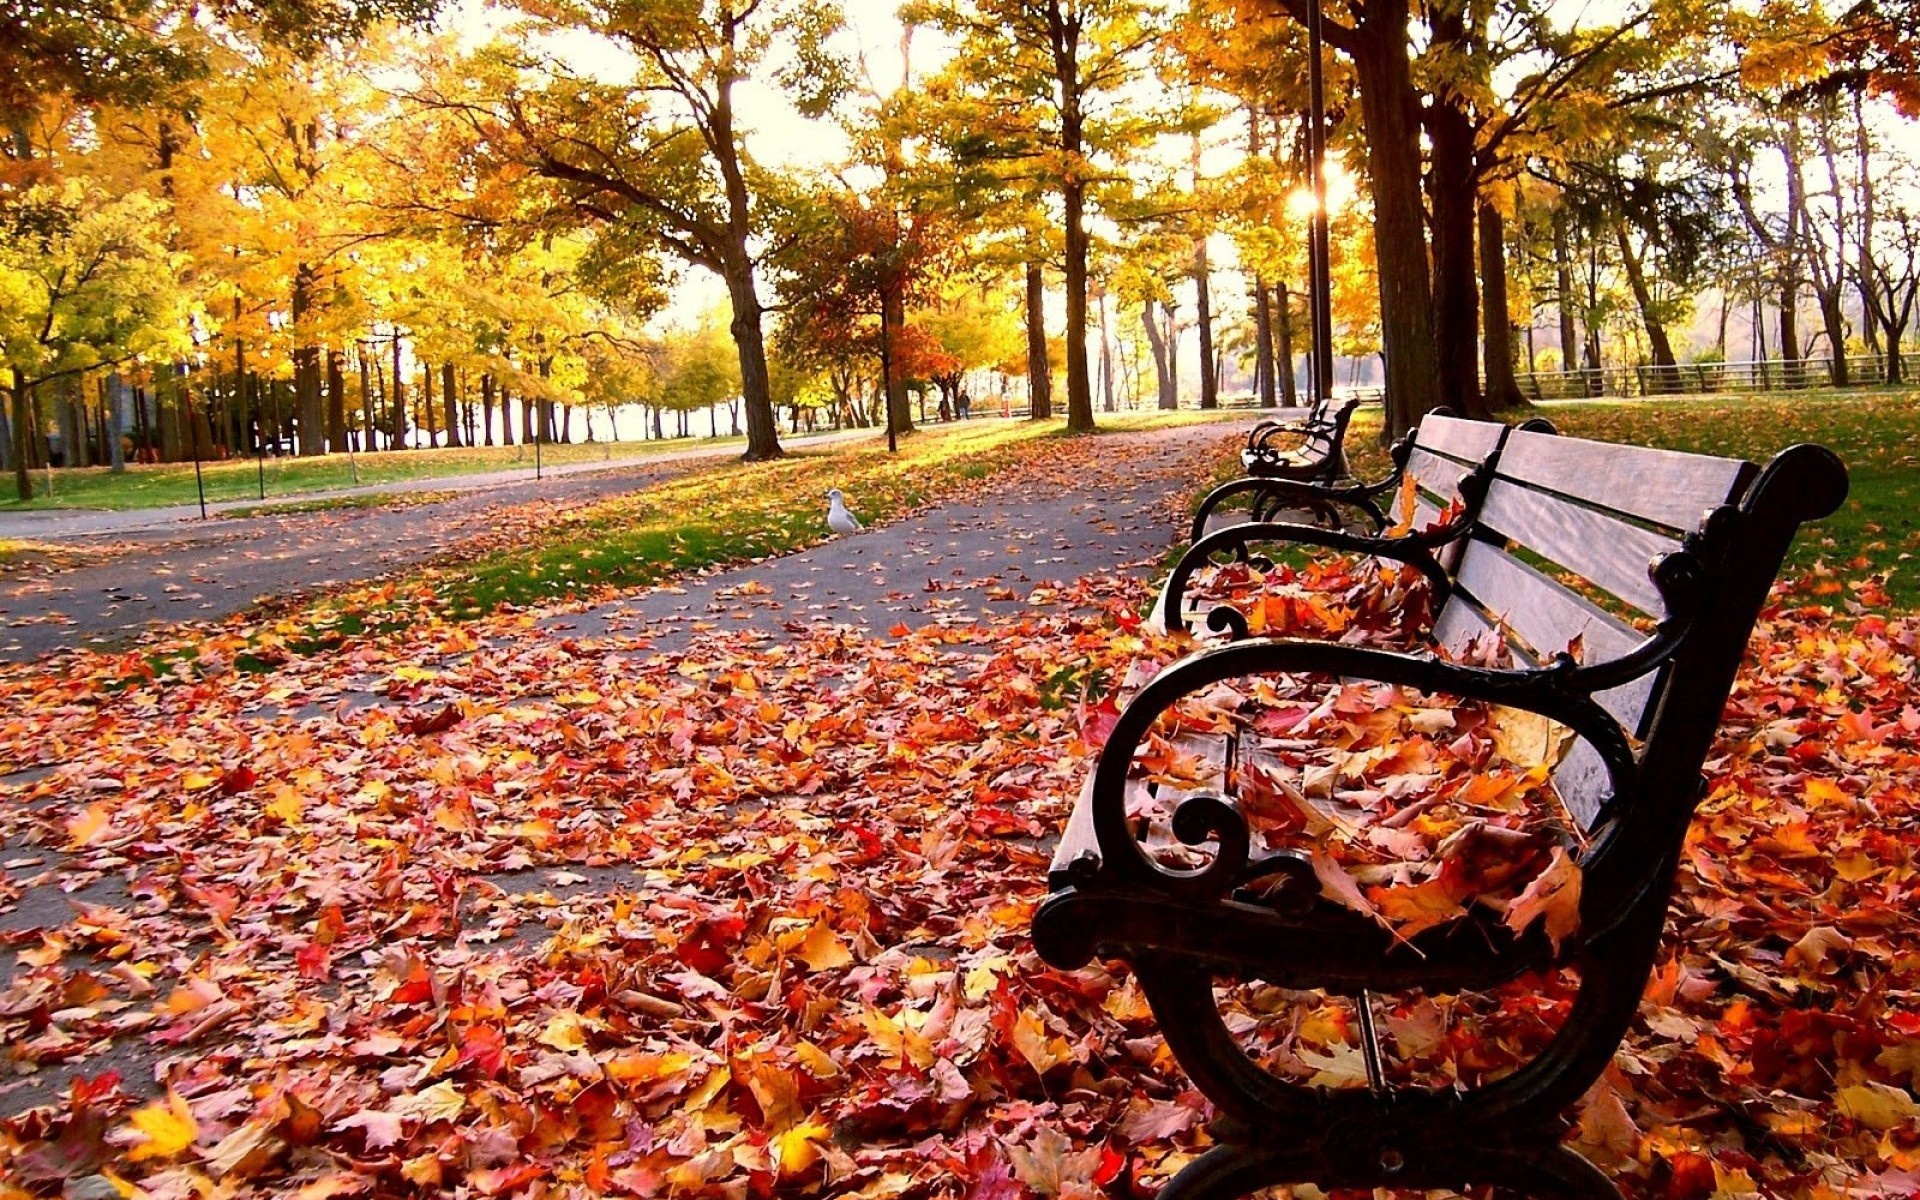 Autumn Wallpaper Leaves Leaf Fall Trees Bench Park Hd 1920x1200px